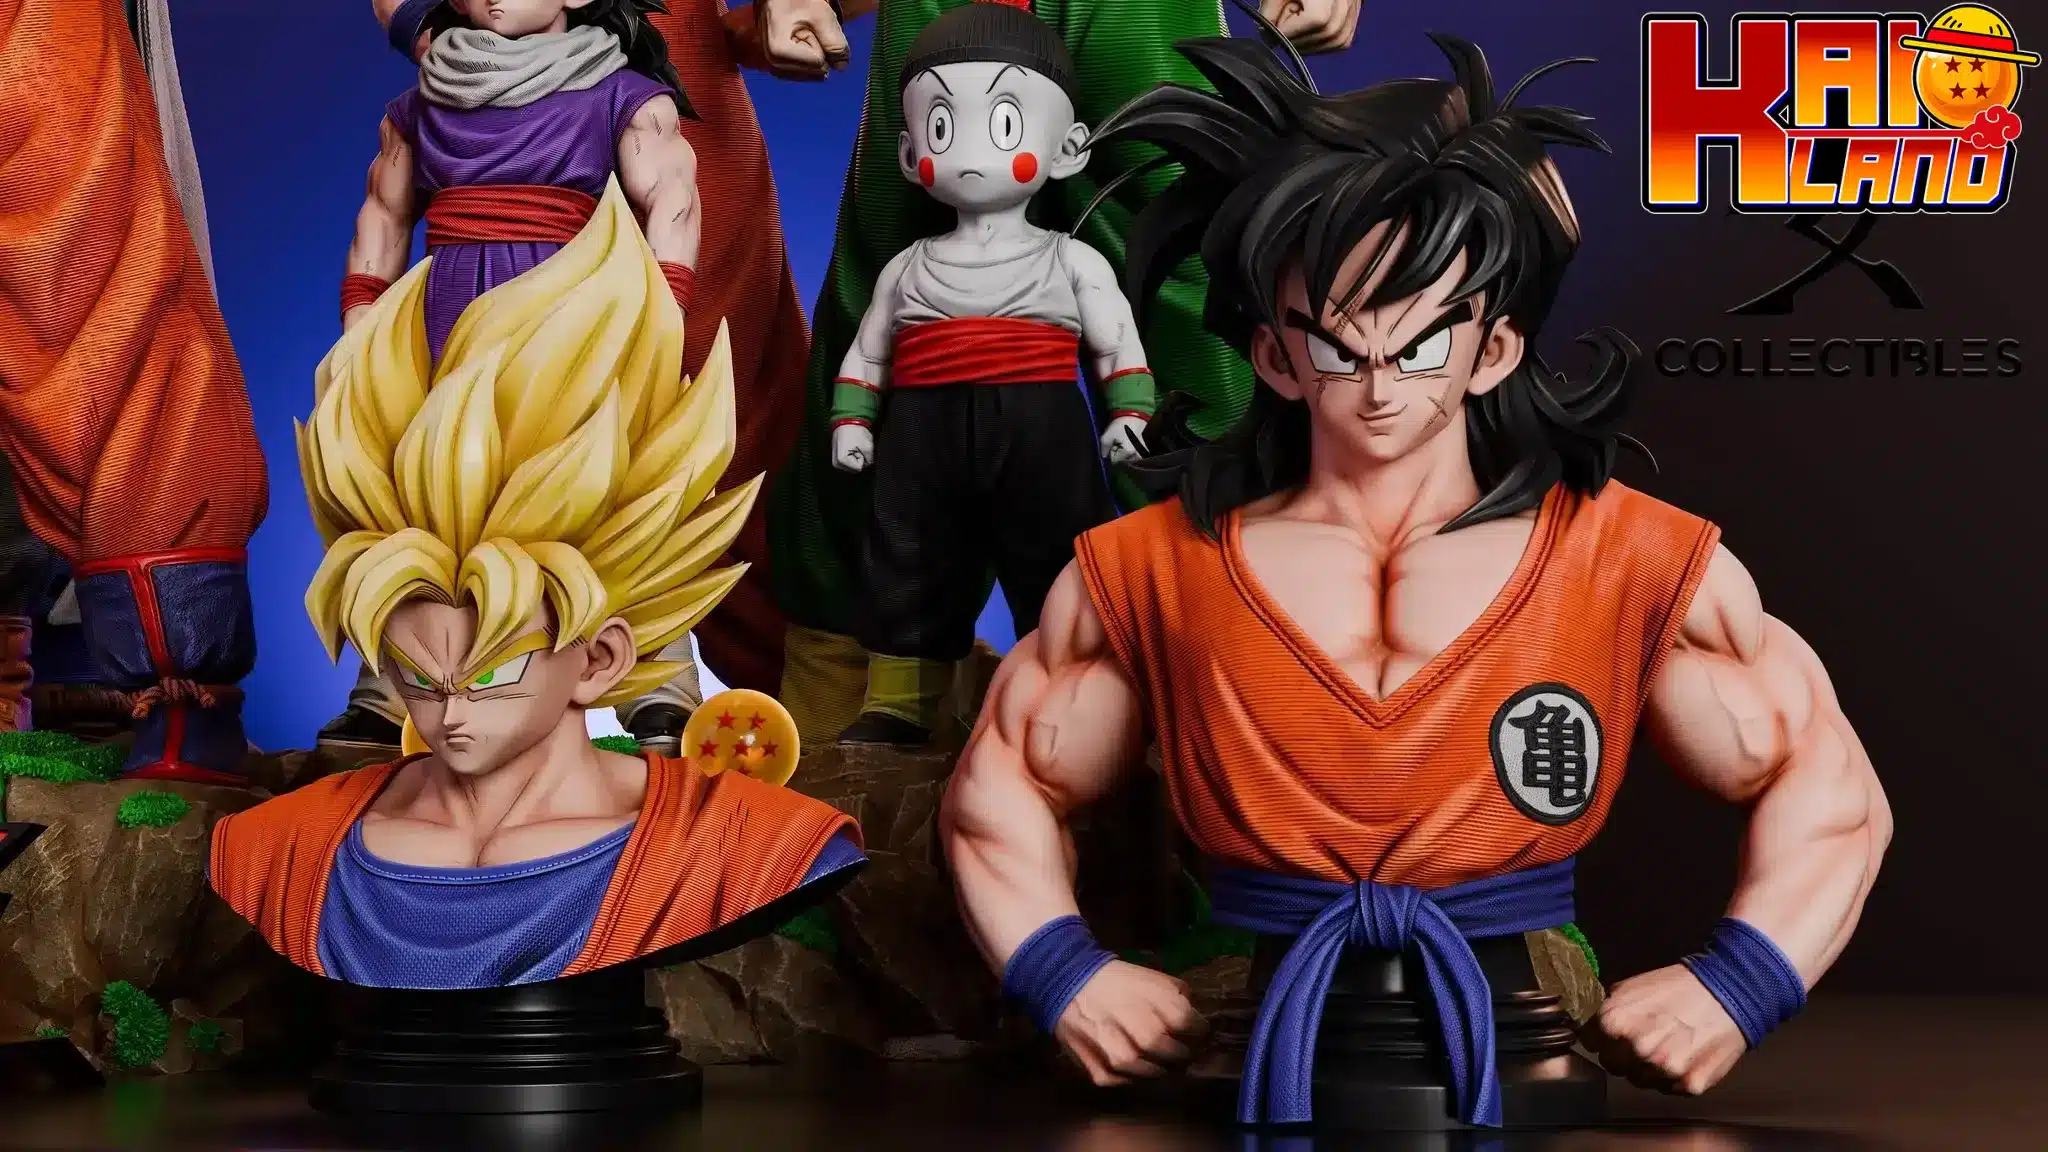 Dragon-Ball-KD-Collectibles-Z-Fighters-Resin-Statue-5-jpg.png